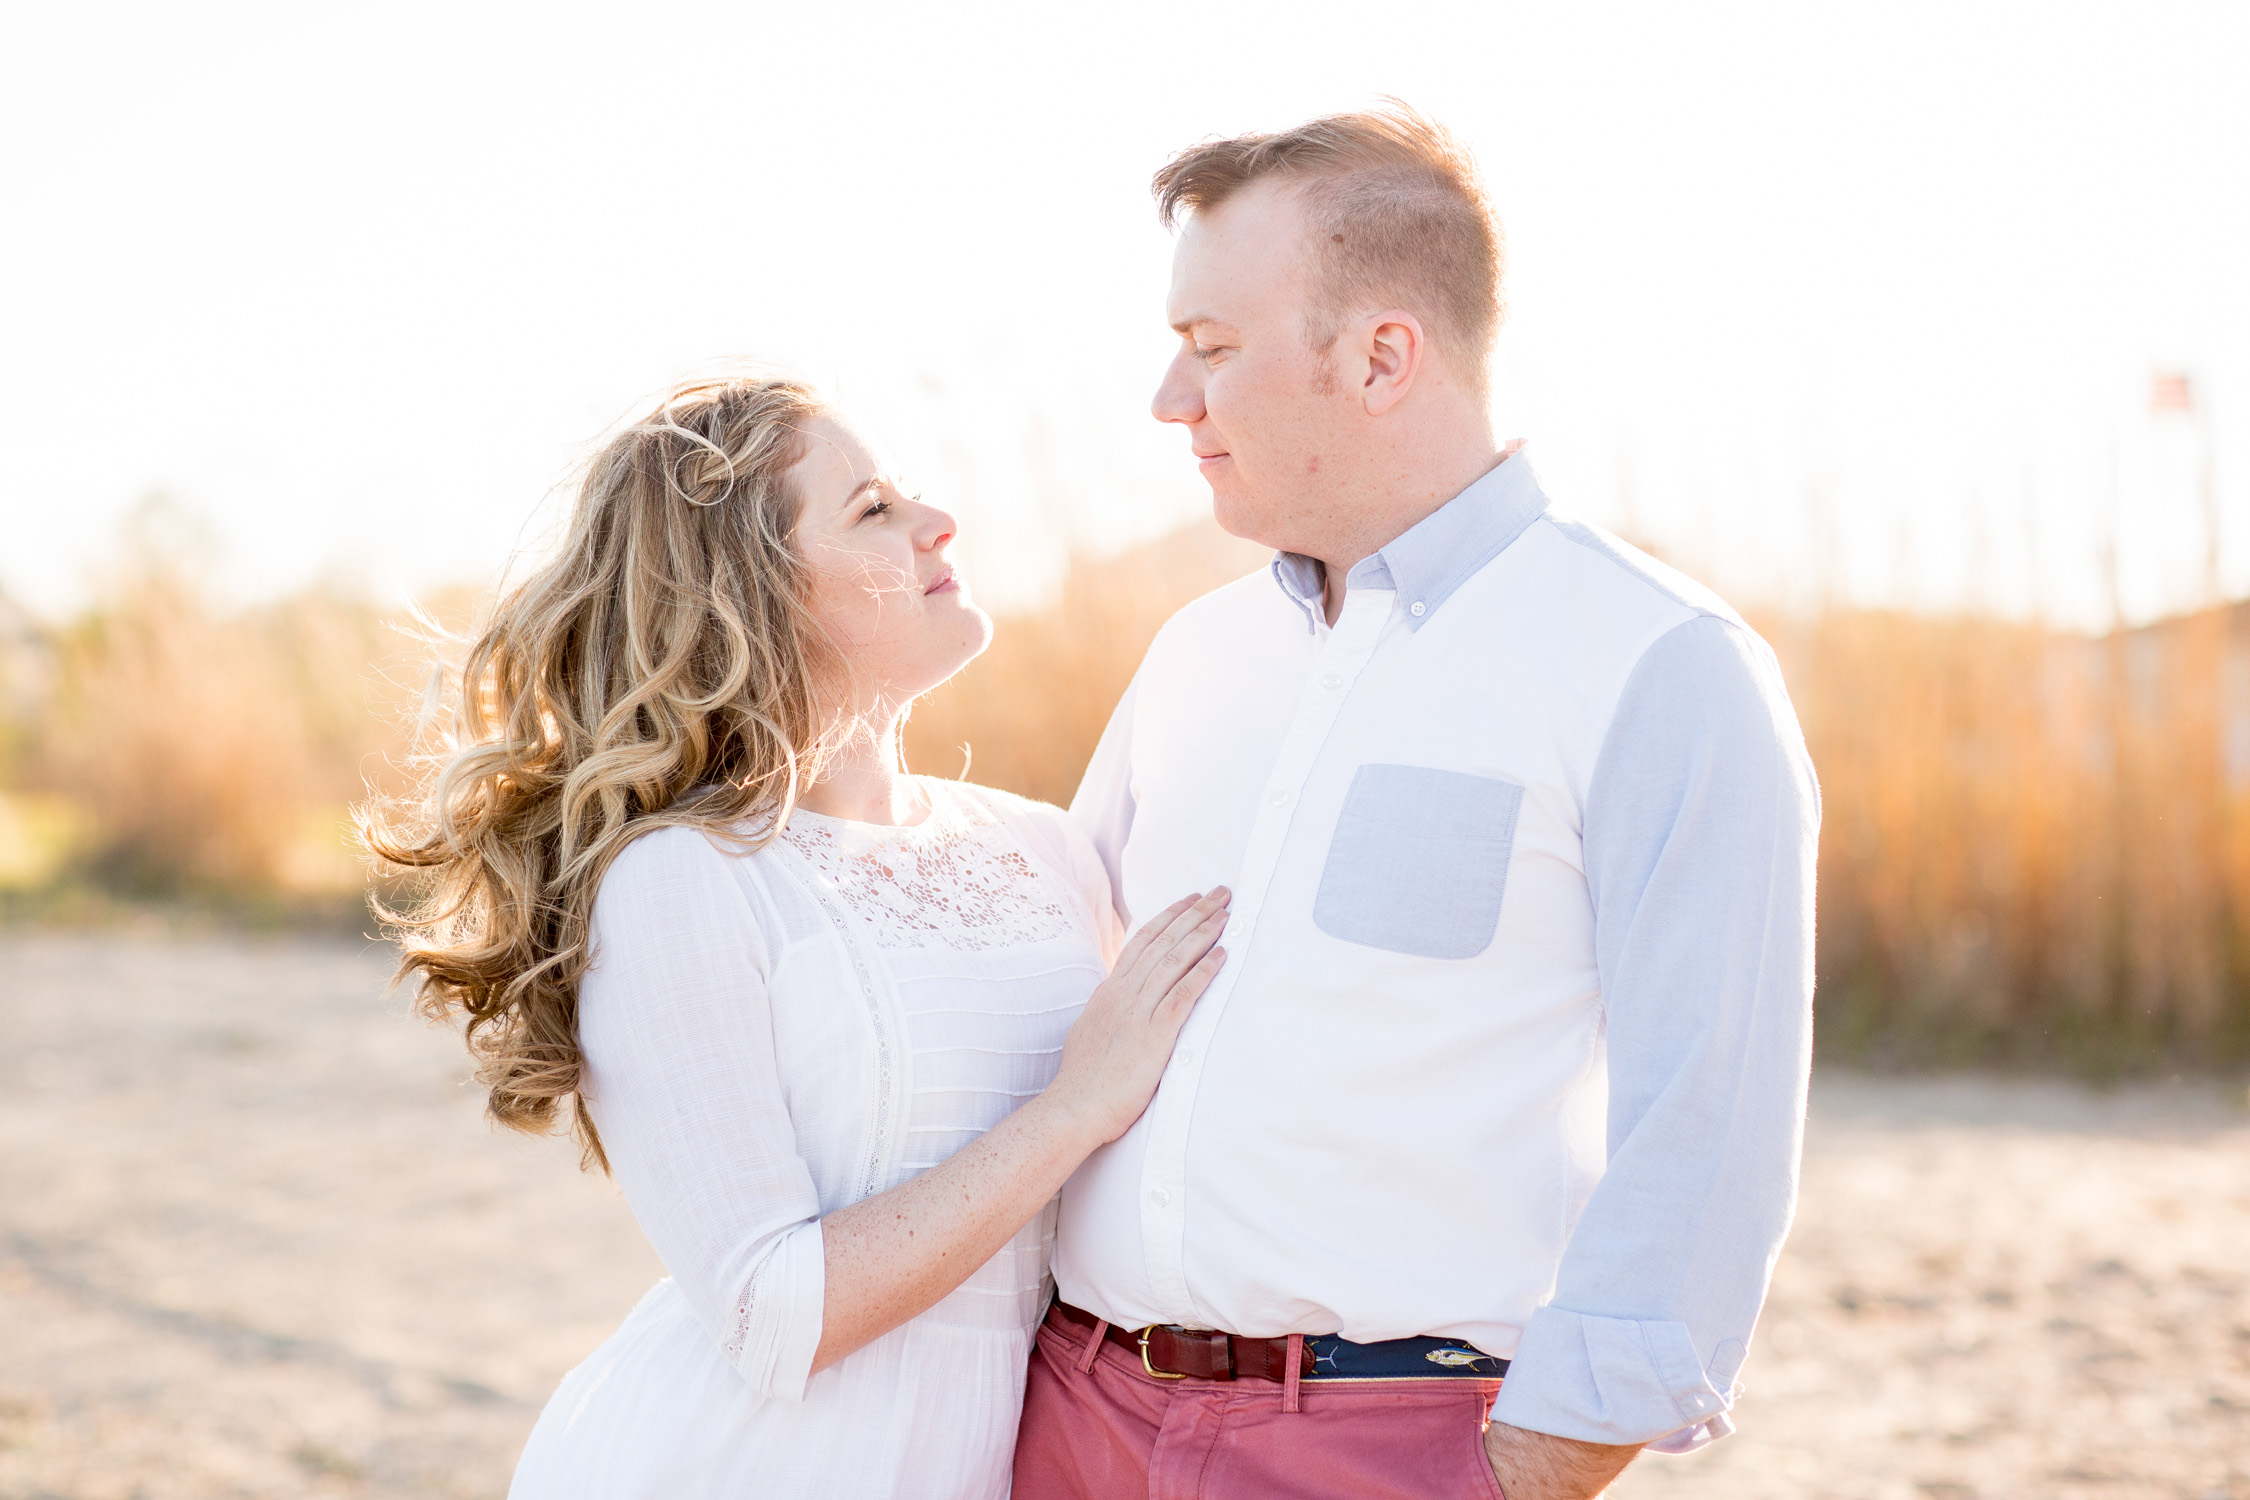 Tracey Buyce Engagement Photography53.jpg